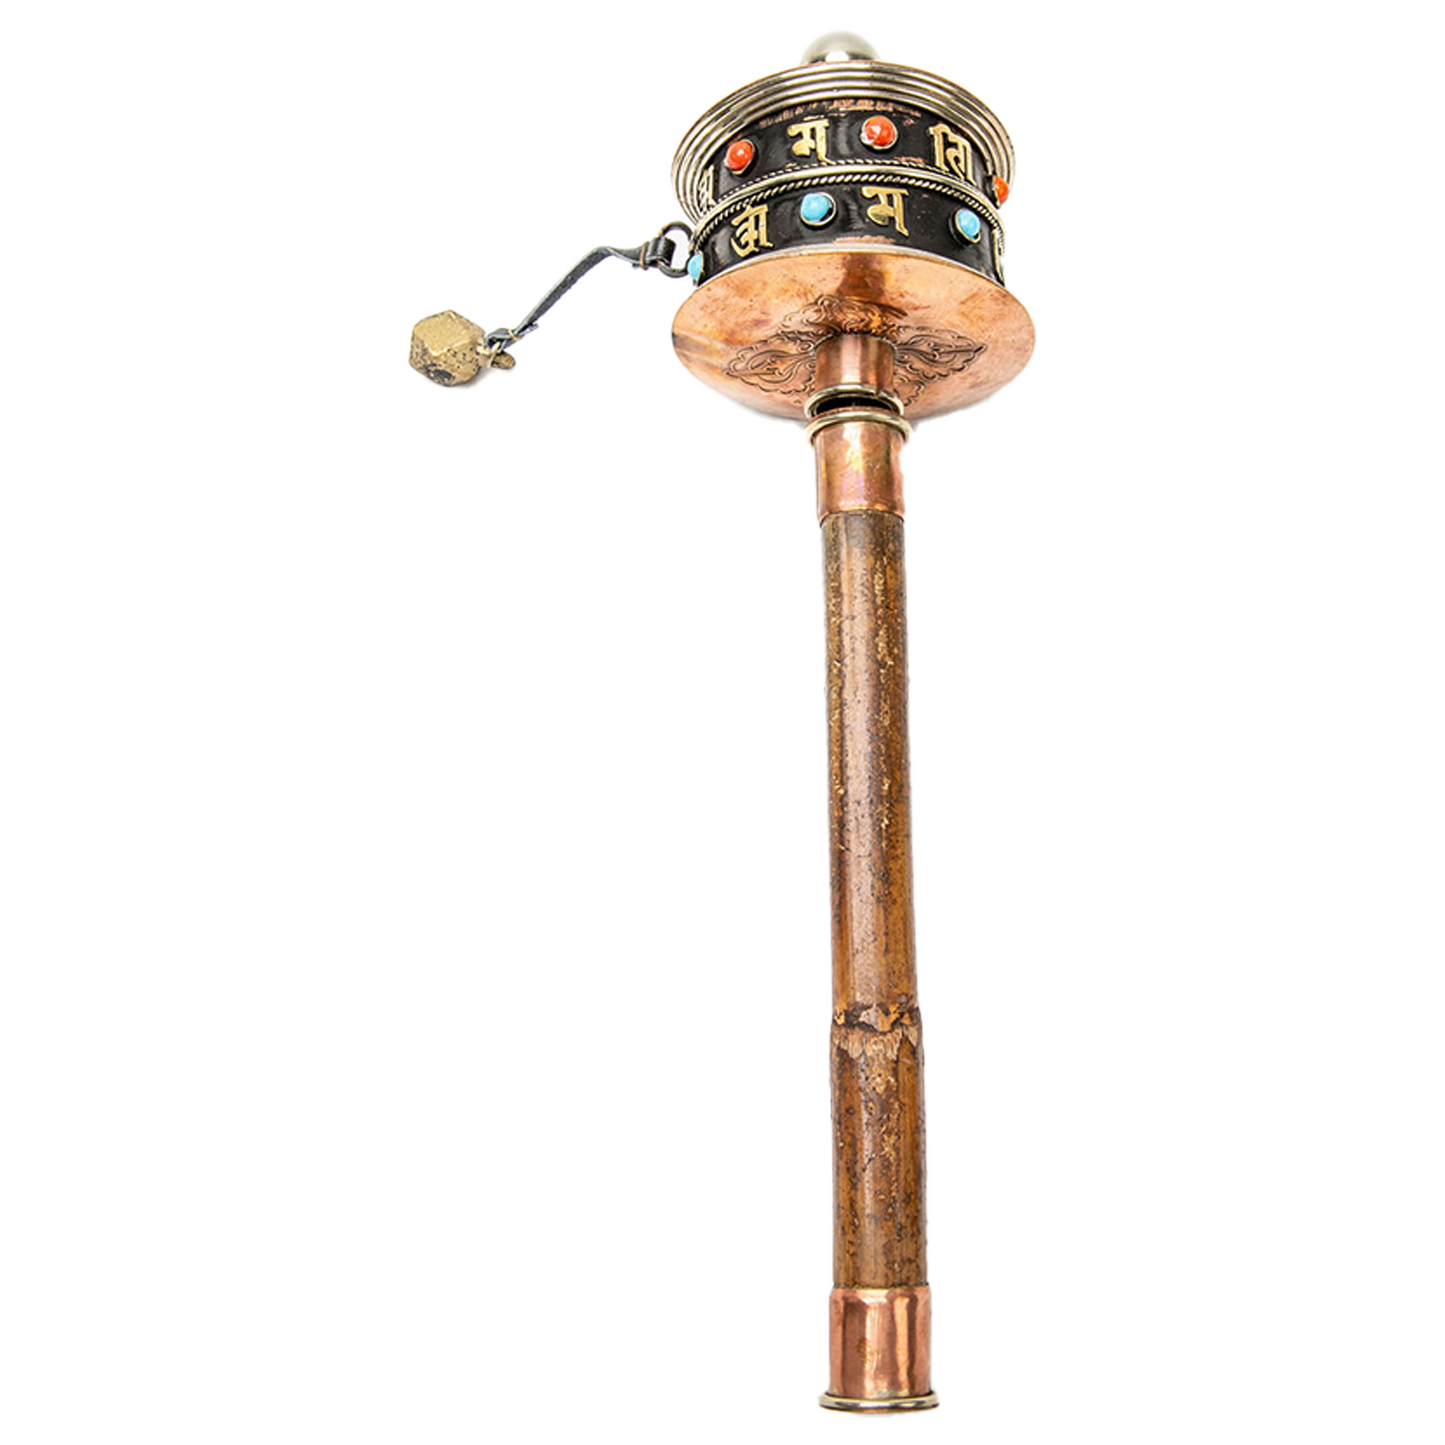 Underside perspective of big Handheld Prayer Wheel on a solid white backdrop.